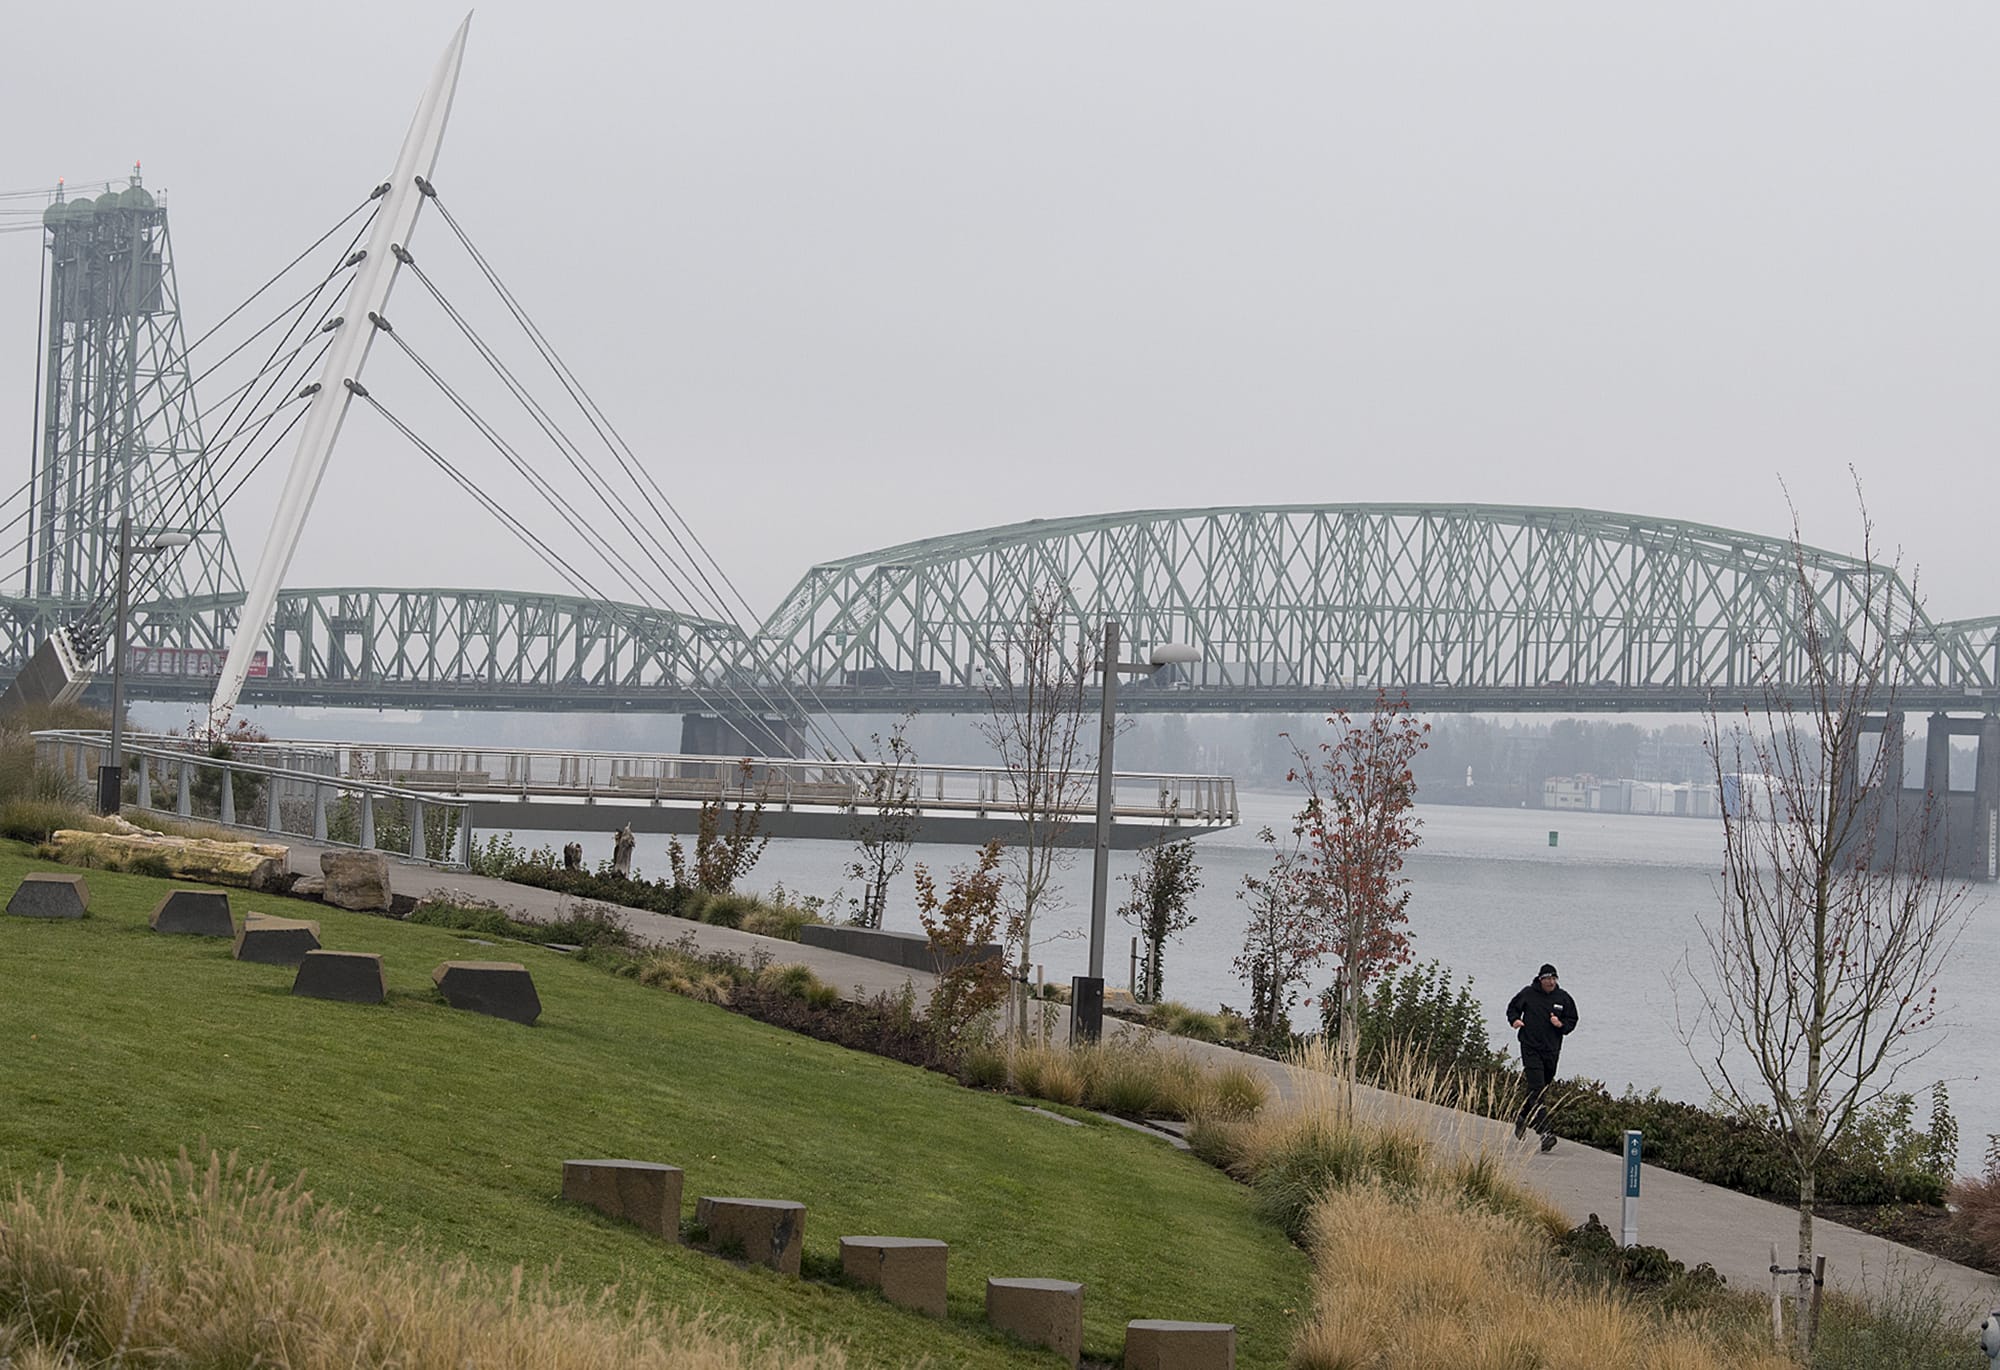 Battle Ground resident James Fields takes the fog in stride while running near the Grant Street Pier as stagnant air causes the fall air to linger Monday morning, Nov. 4, 2019. Fields, who works in Vancouver, said he was been enjoying the sport since junior high and the cool, seasonal temperatures were a bonus for joggers. "This is a beautiful time to run," he said.